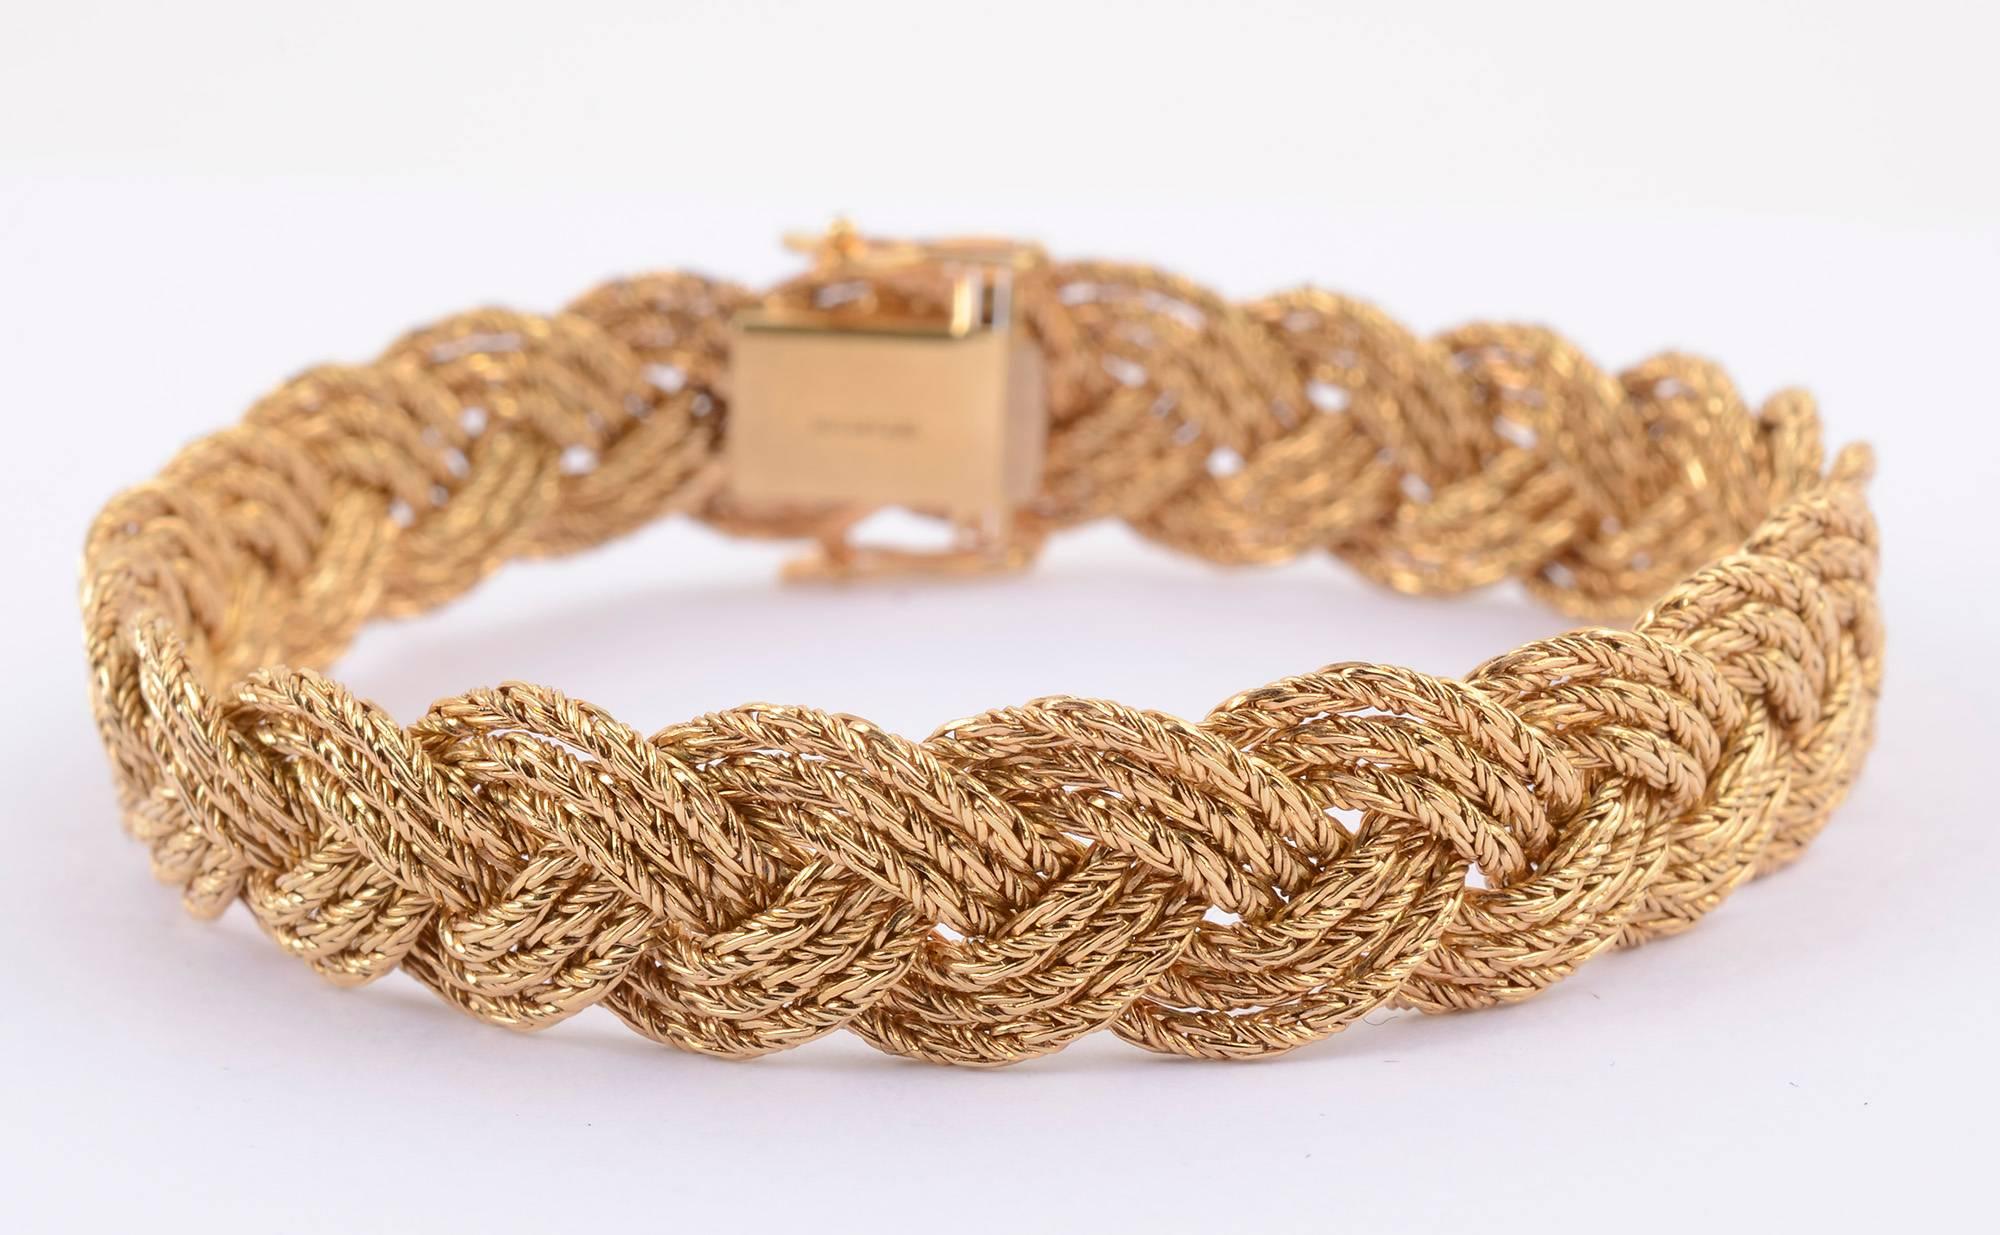 Beautiful eighteen karat gold bracelet  by Tiffany and Co. It is made of three braided strands of gold. Each individual strand is made with a herringbone weave. The complexity of the braiding with the herringbone gives a wonderful glimmer to the